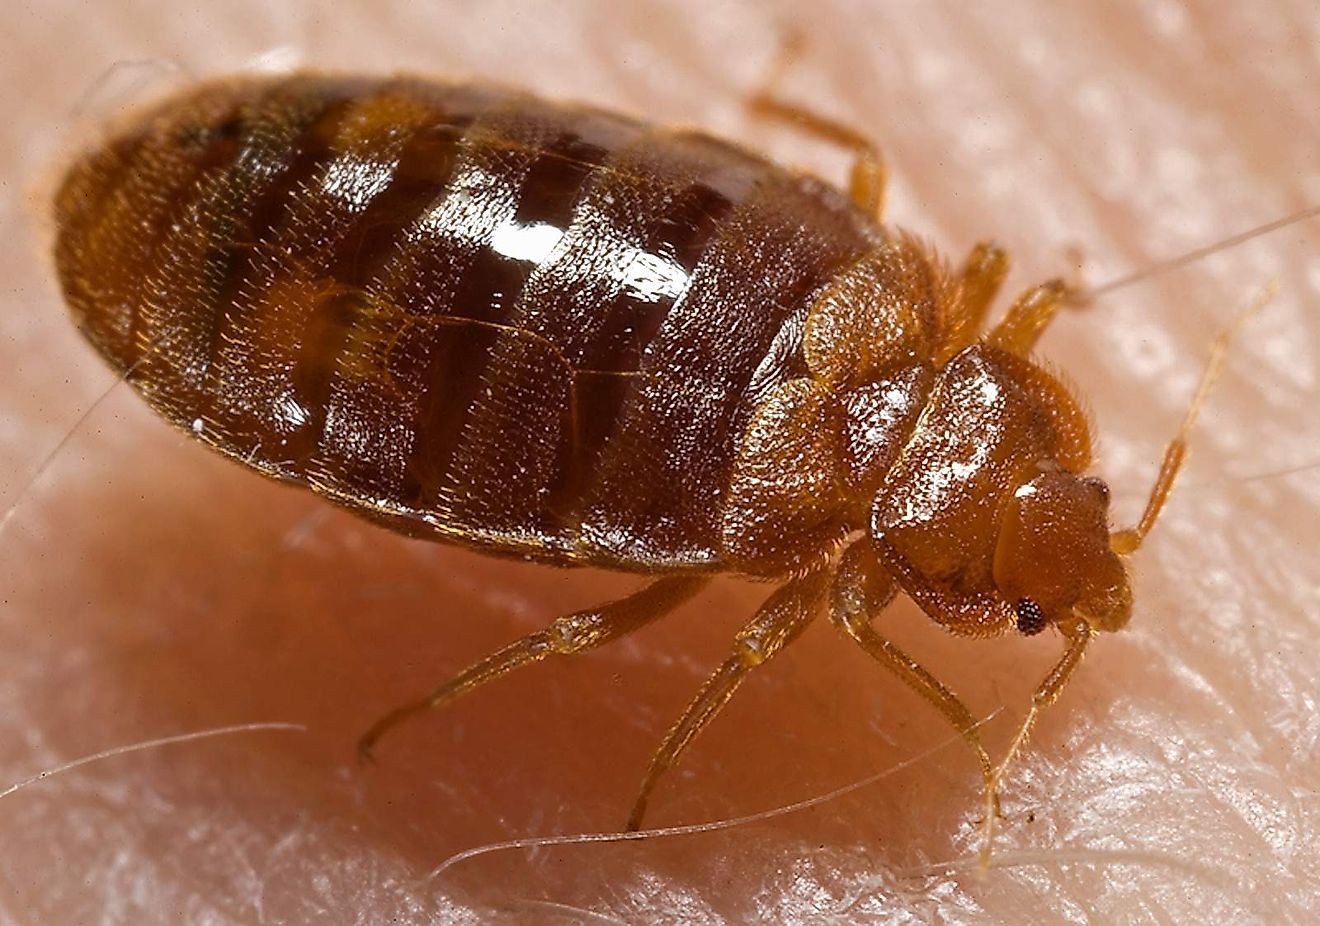 An adult bed bug (Cimex lectularius) with the typical flattened oval shape